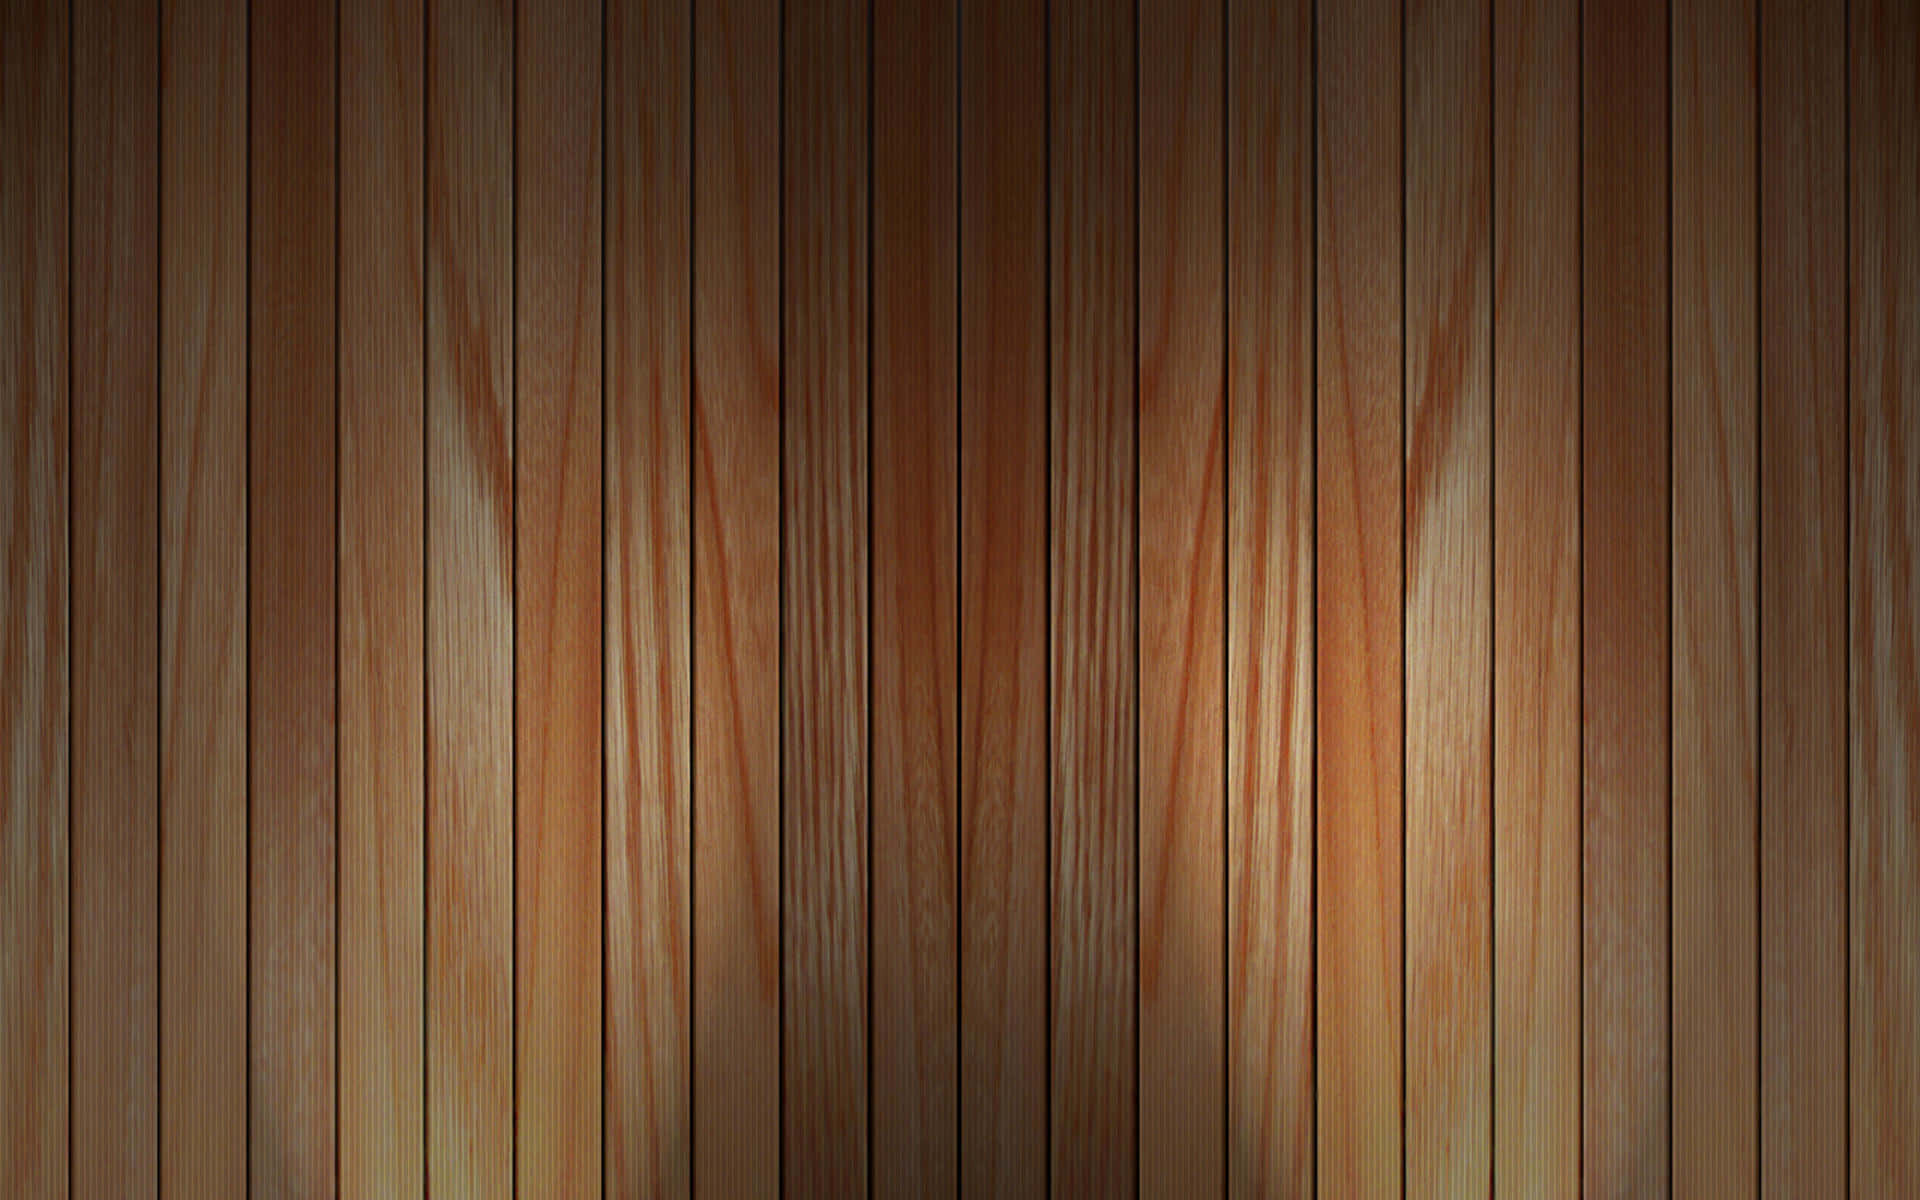 Shiny Panels Wooden Background Texture